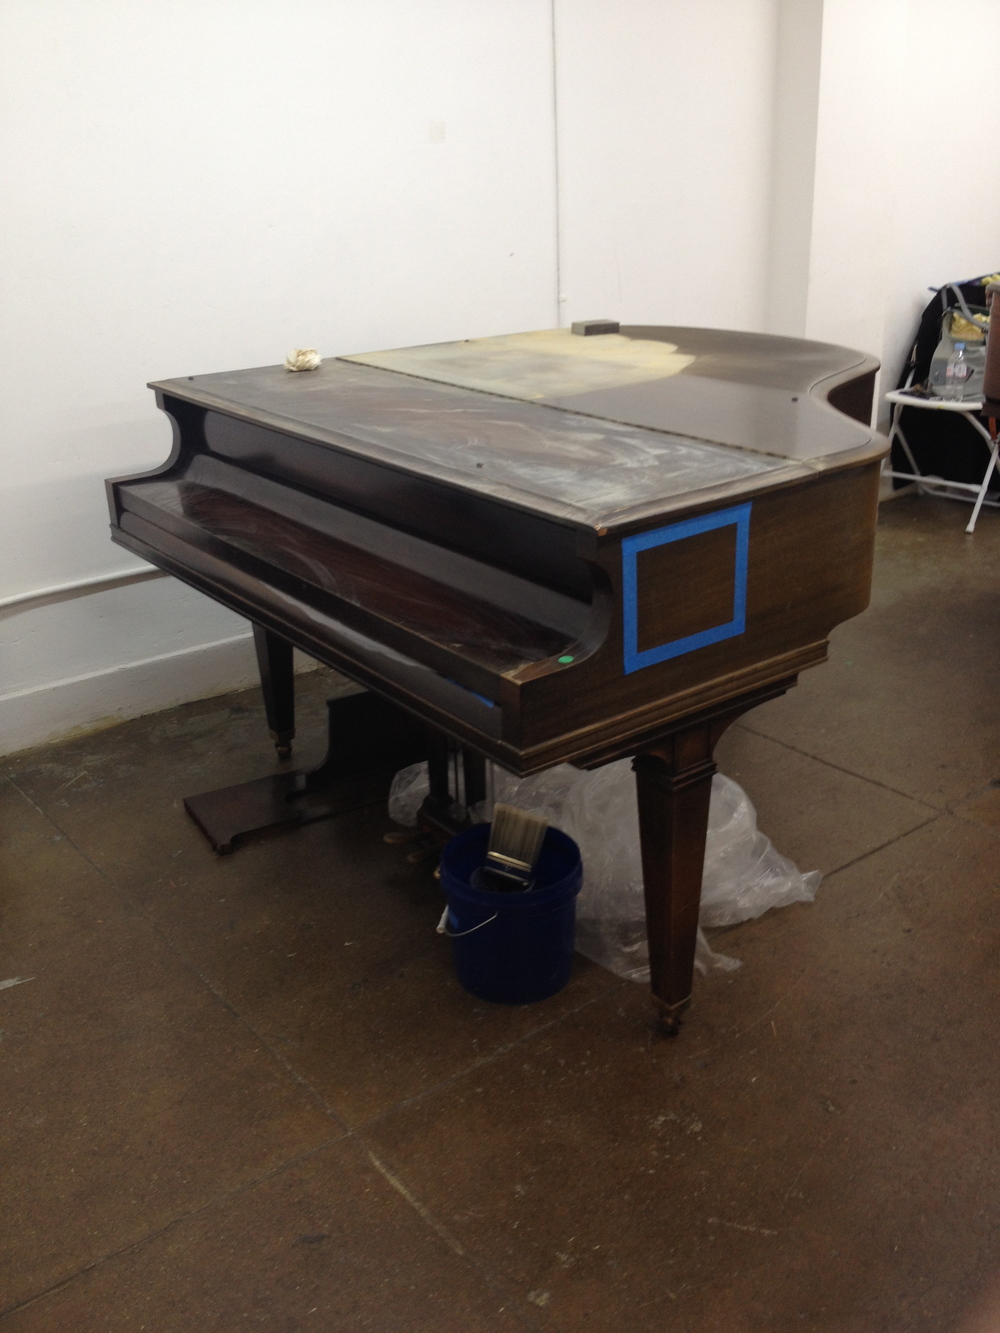 The untouched piano